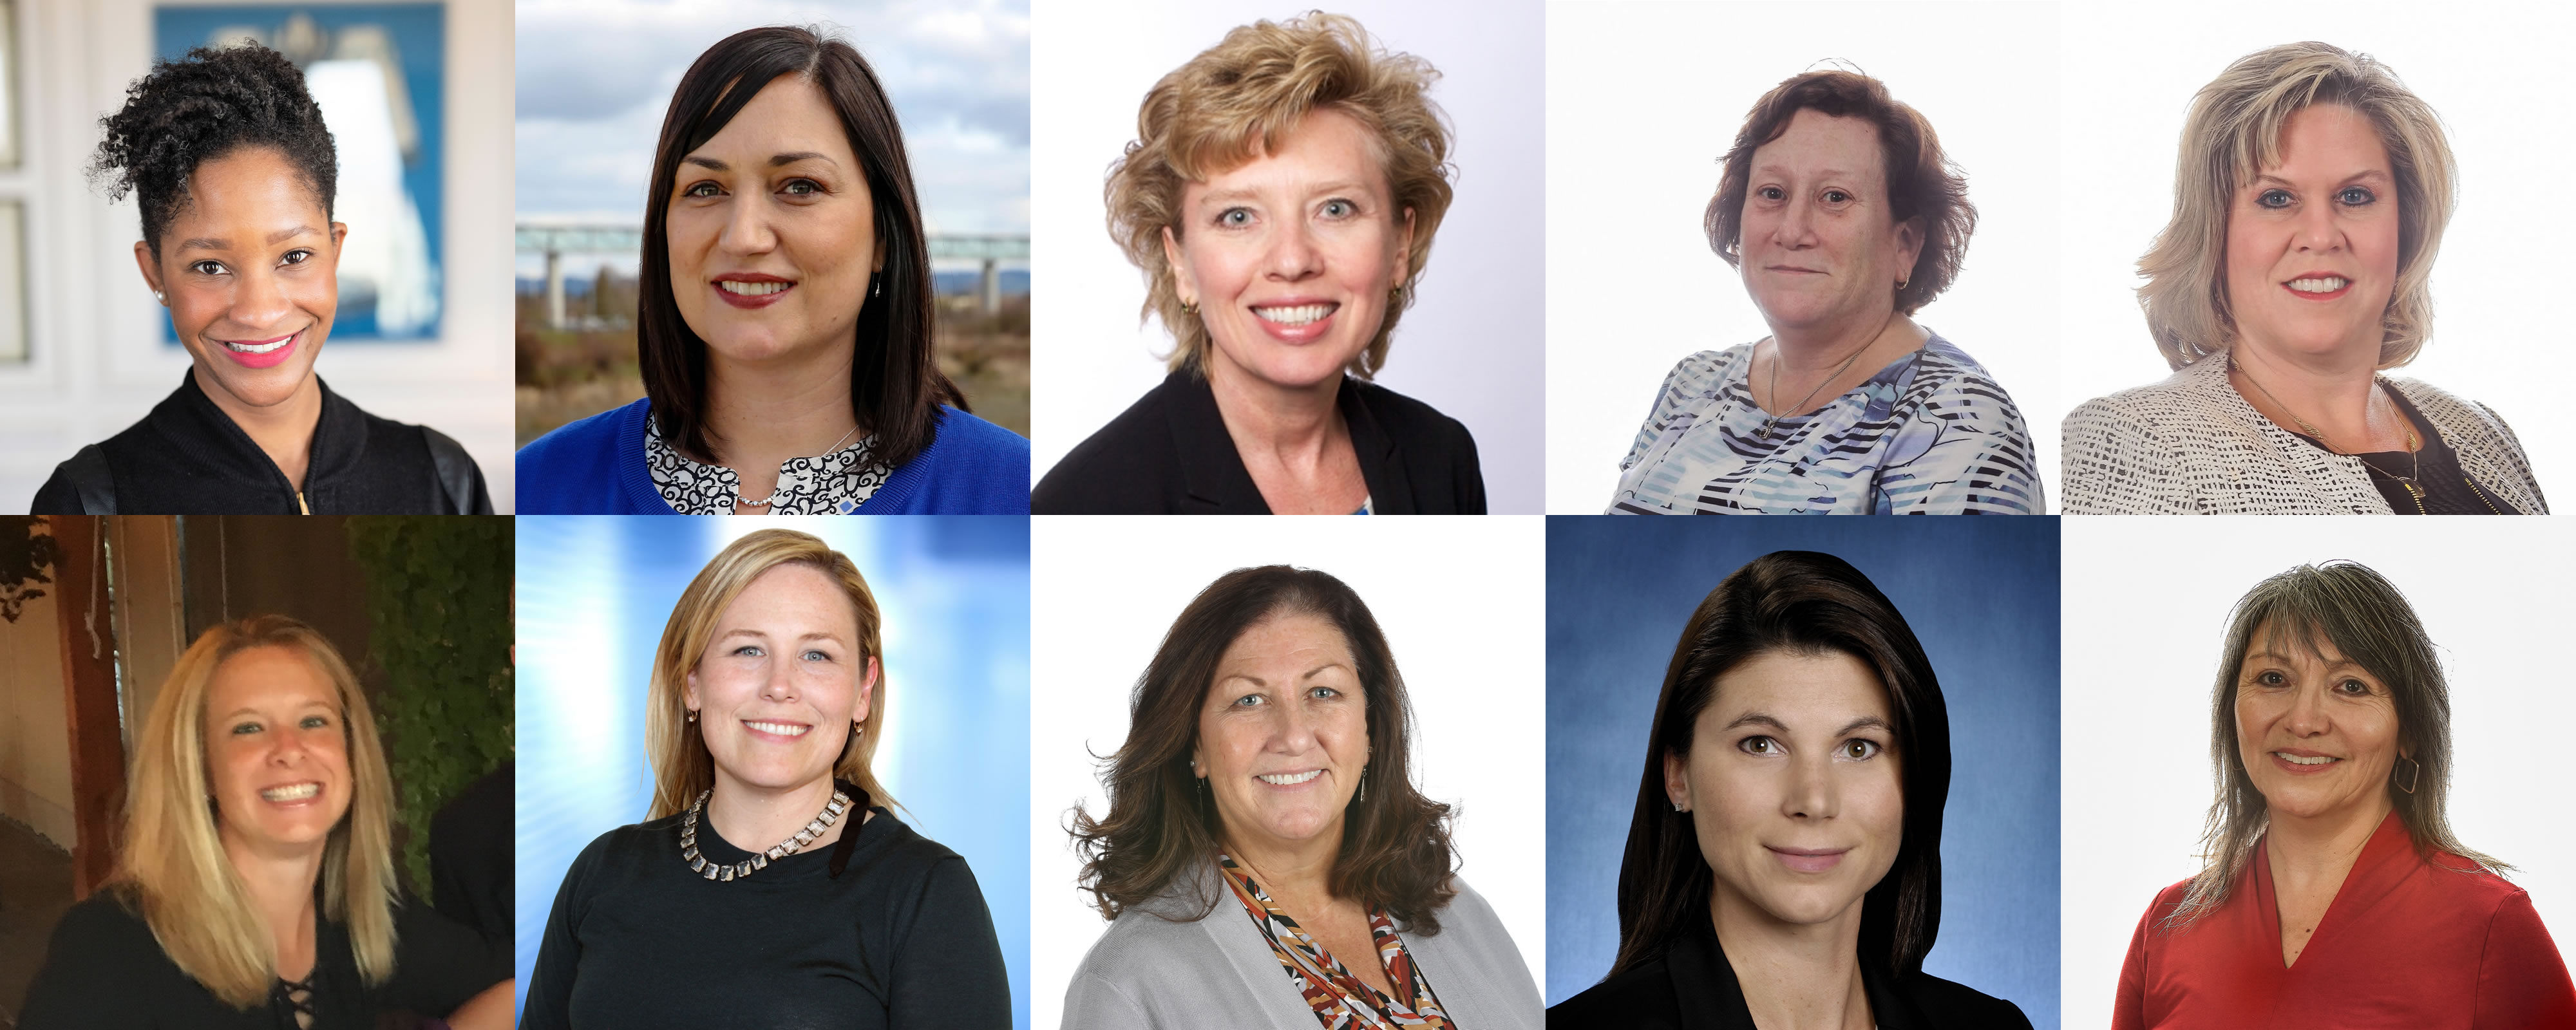 These NAEM members have given many hours of their valuable time to organize and plan this event, with the goal of fostering a dynamic discussion of women's leadership issues specific to the EHS&S discipline. Be sure to say hi and thank them at the event!